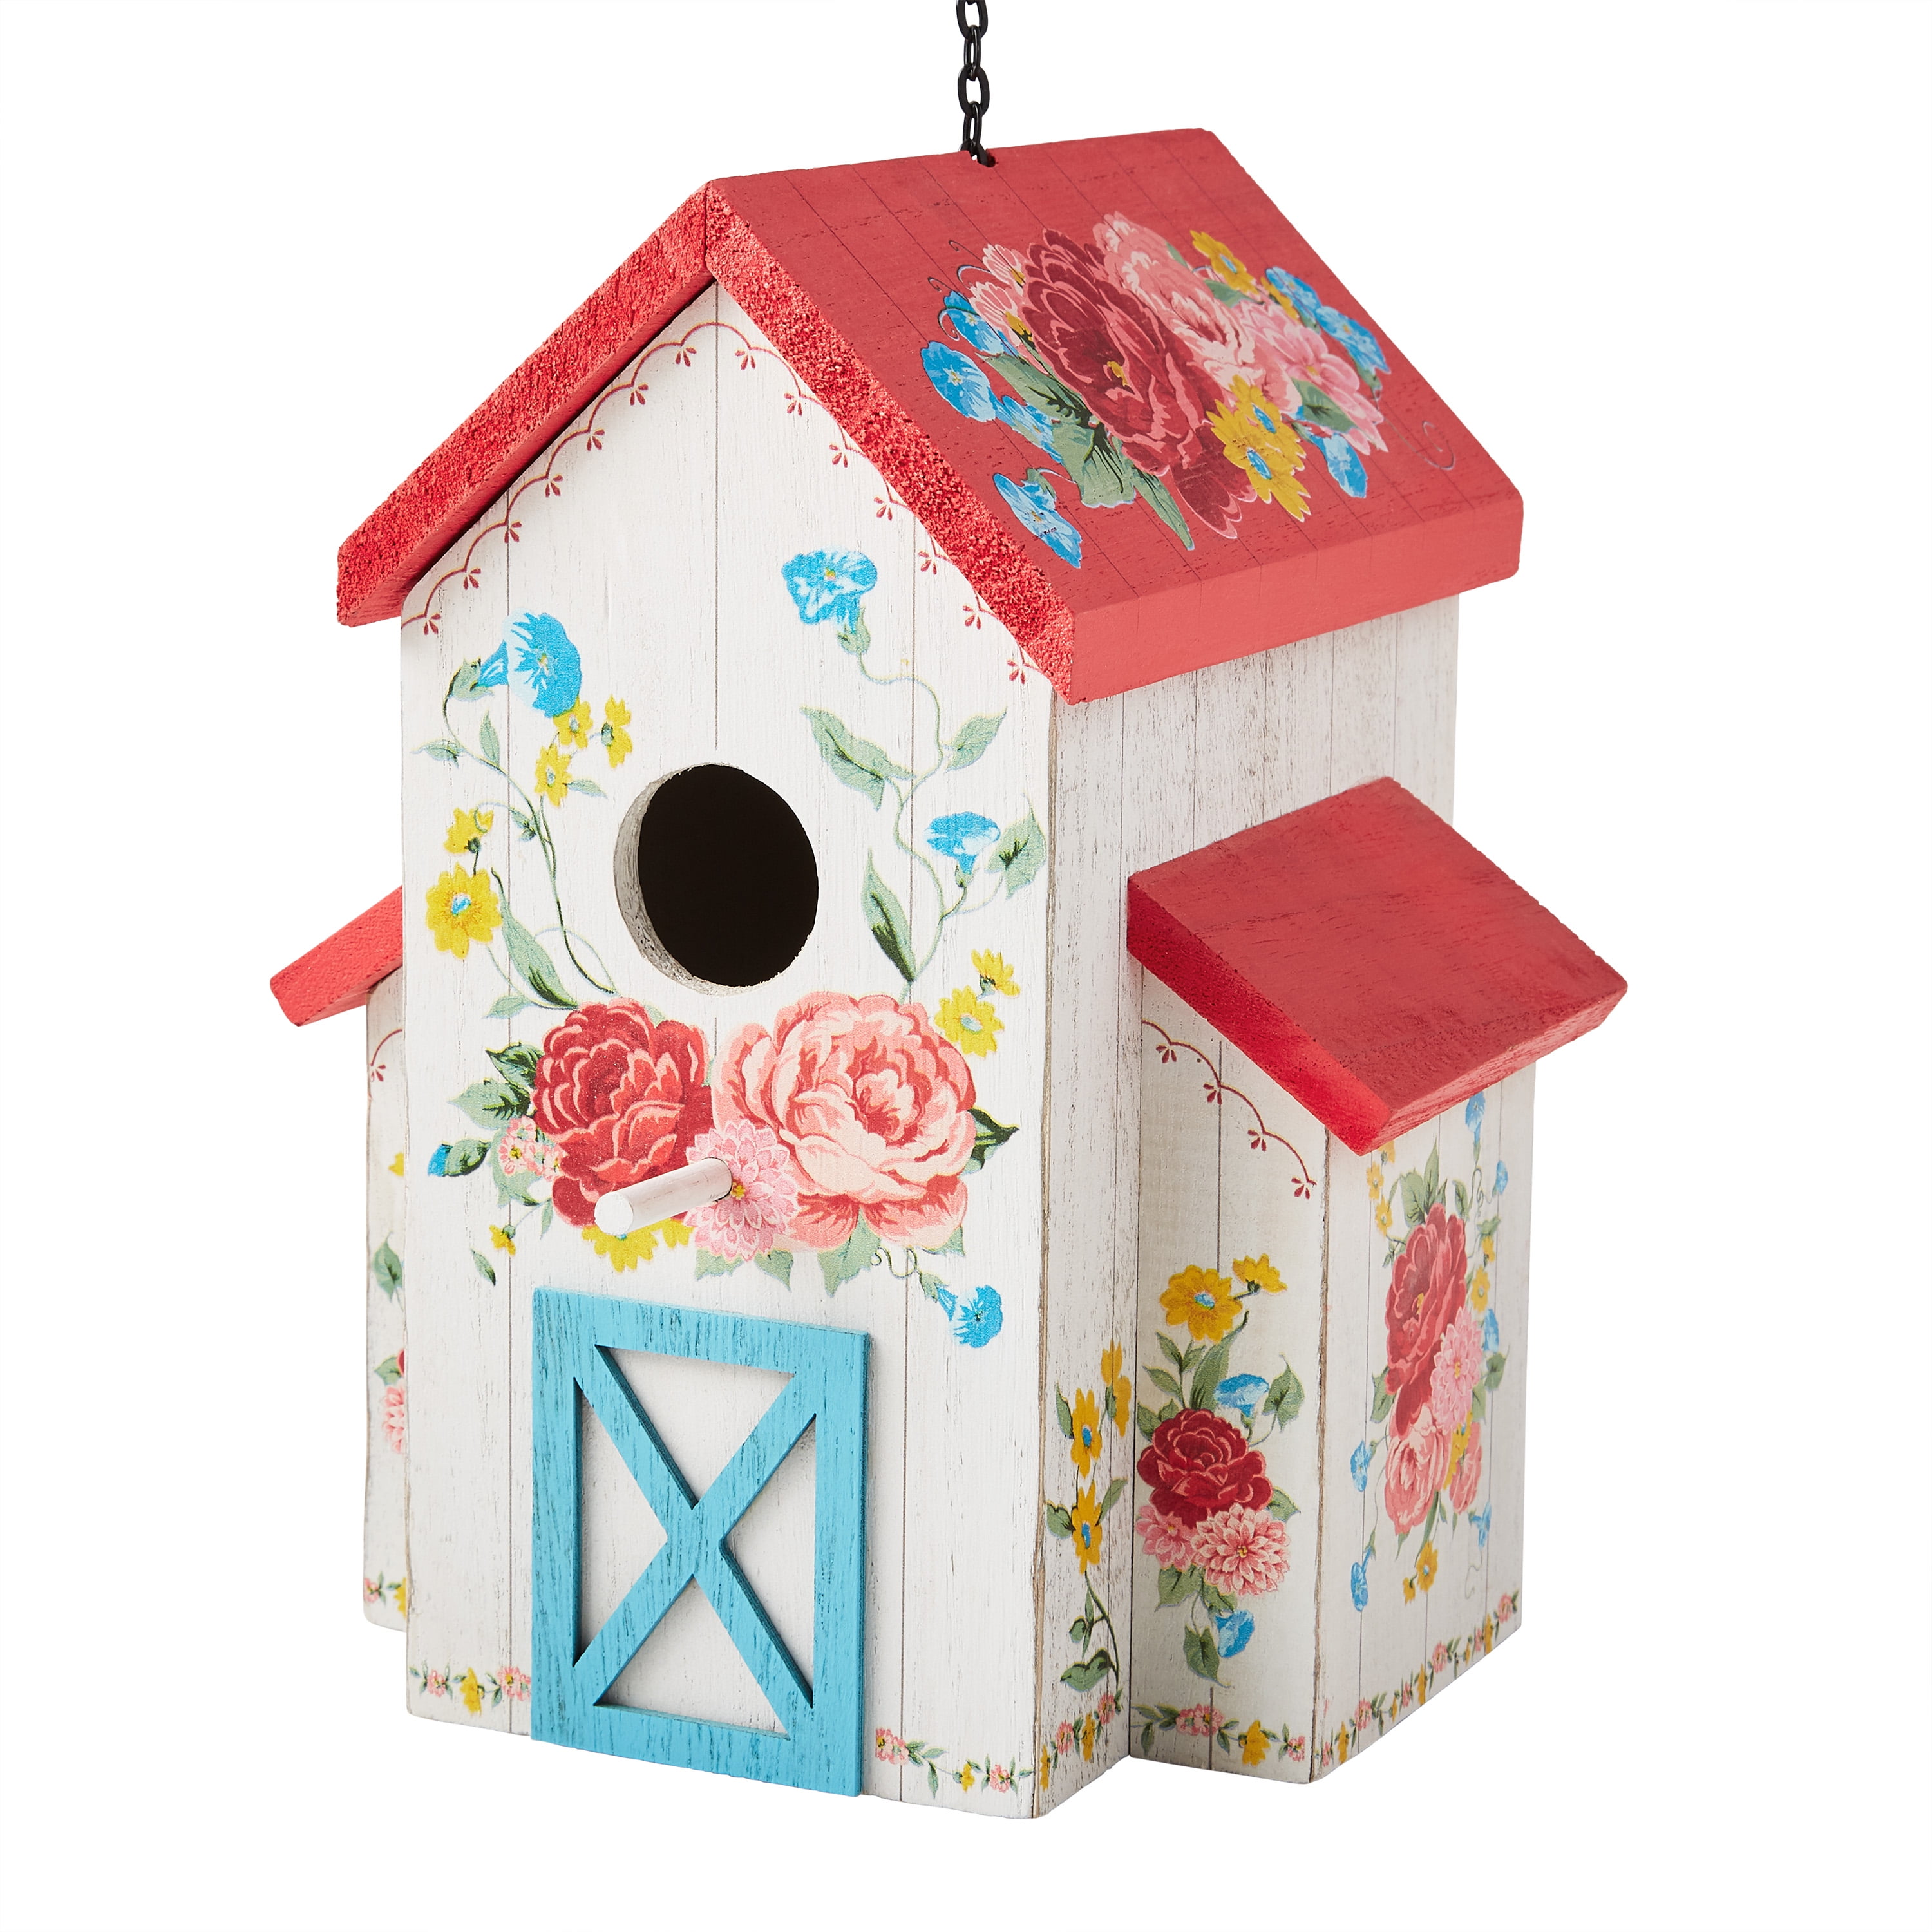 enjoy birds watching Cute Home Decor Wood Birdhouse With Flower Opening 